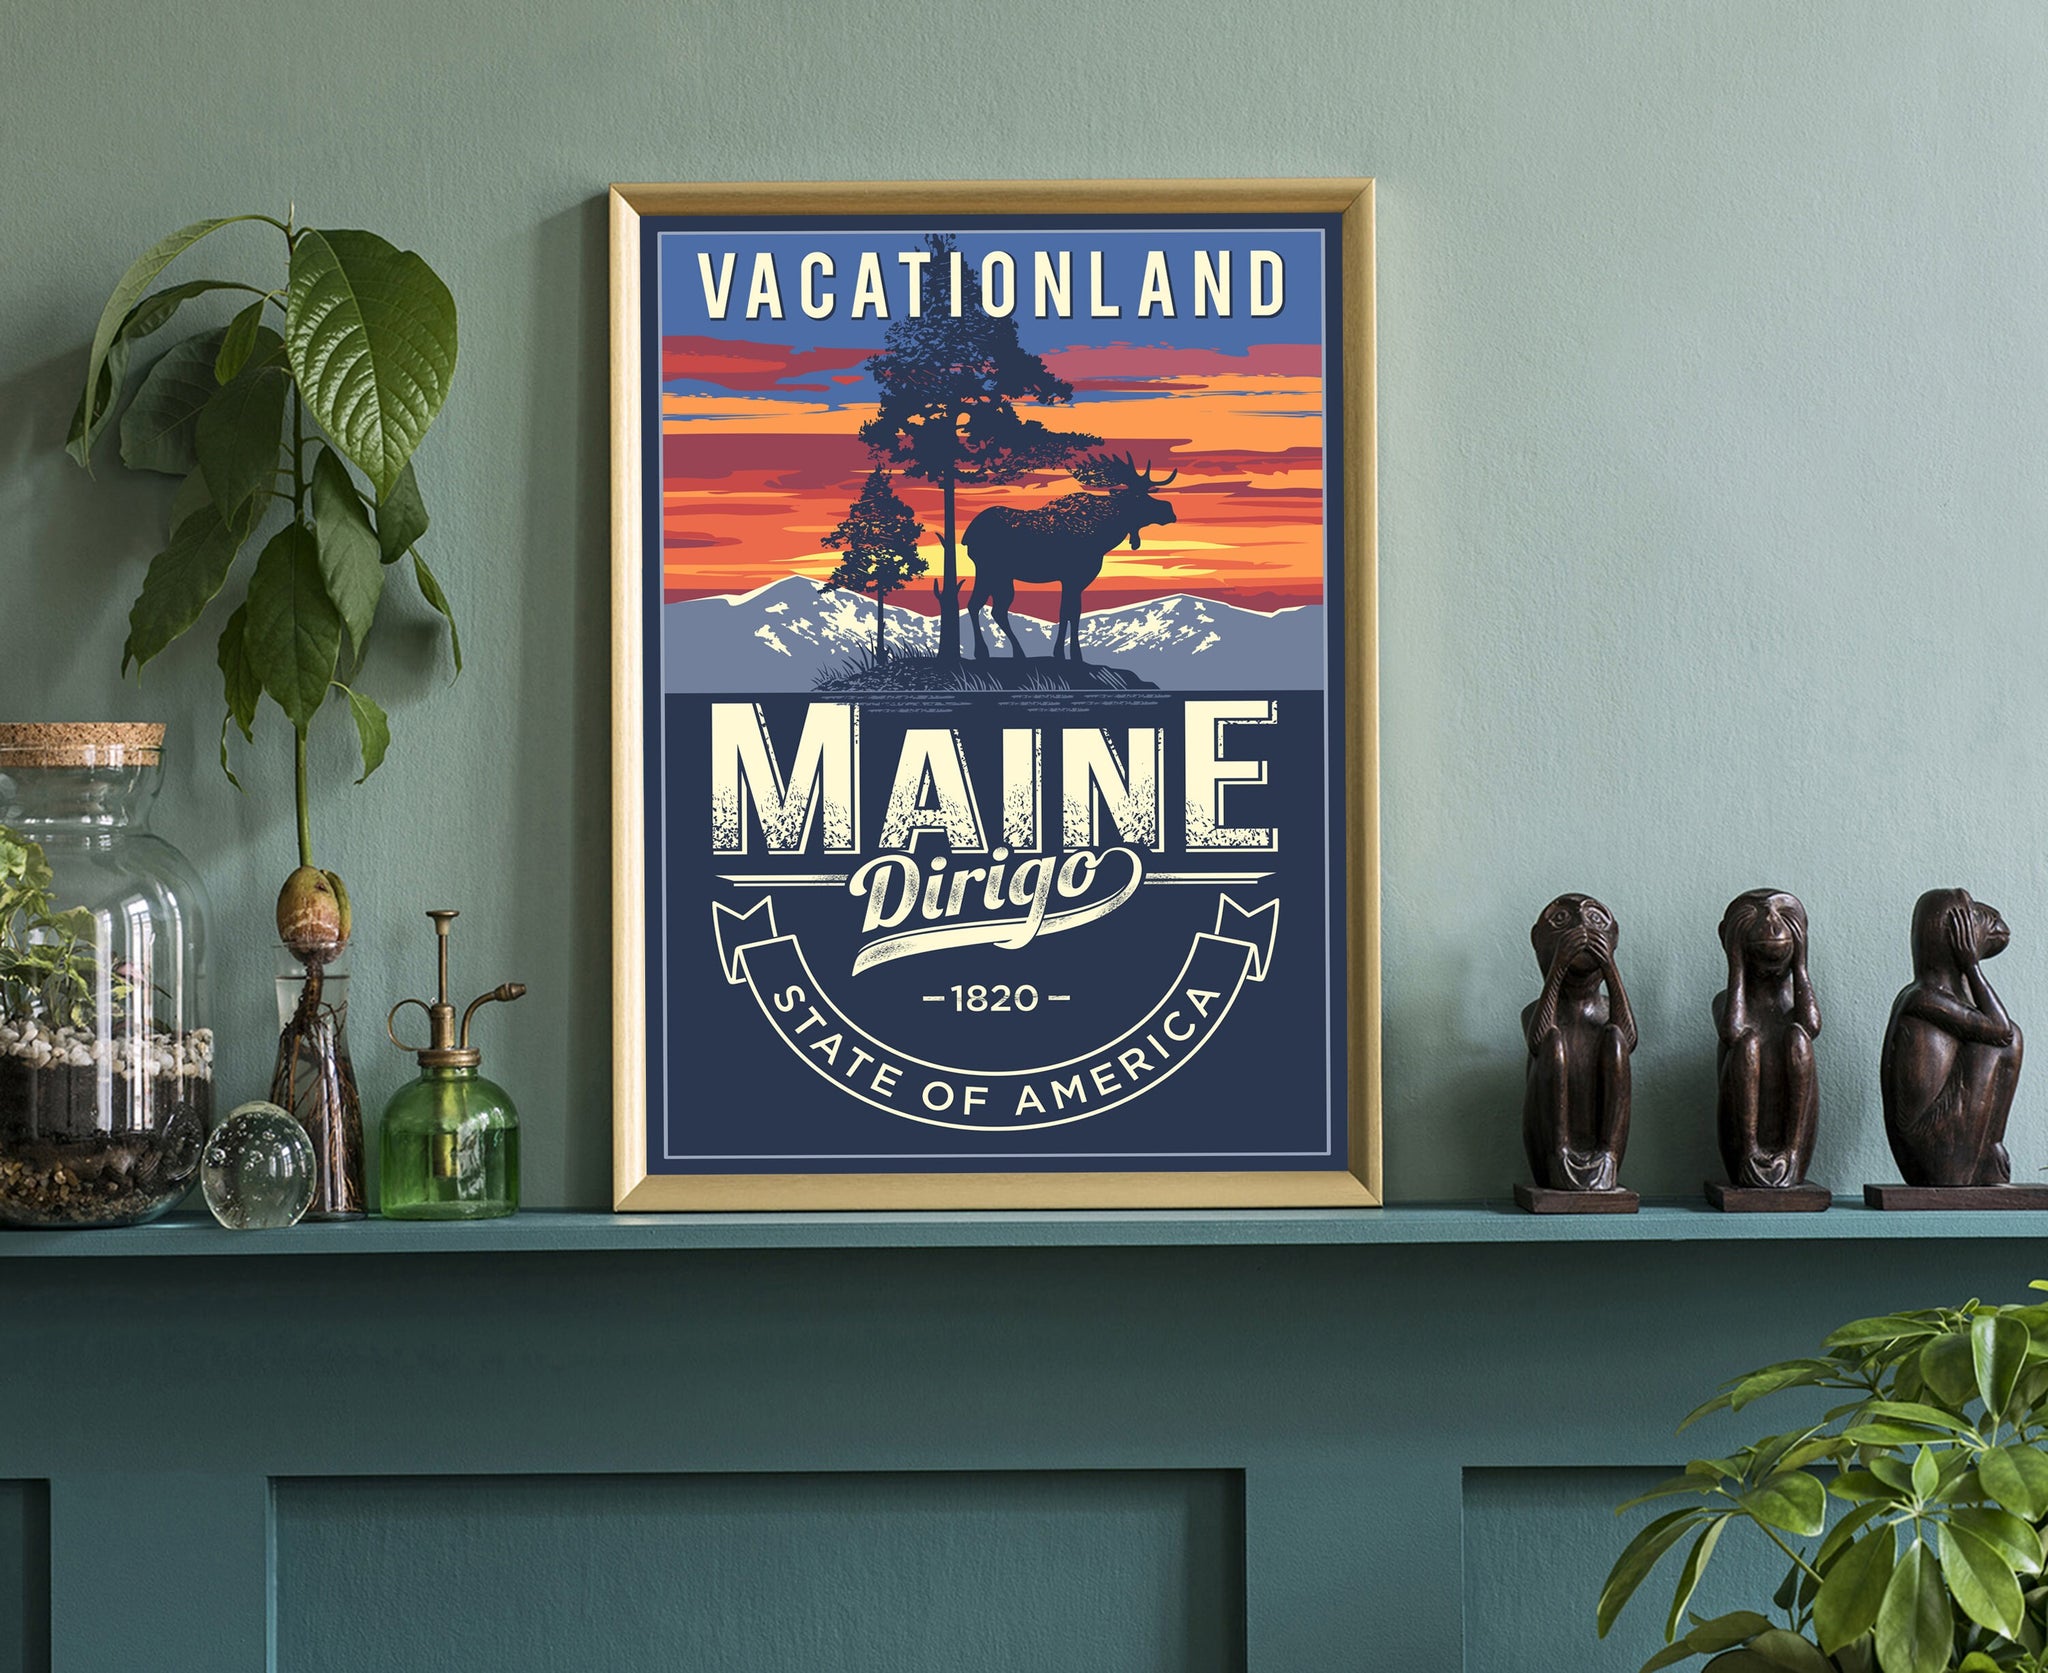 United States Poster, Maine State Poster Print, Maine State Emblem Poster, Retro Travel State Poster, Home Wall Art, Office Wall Art